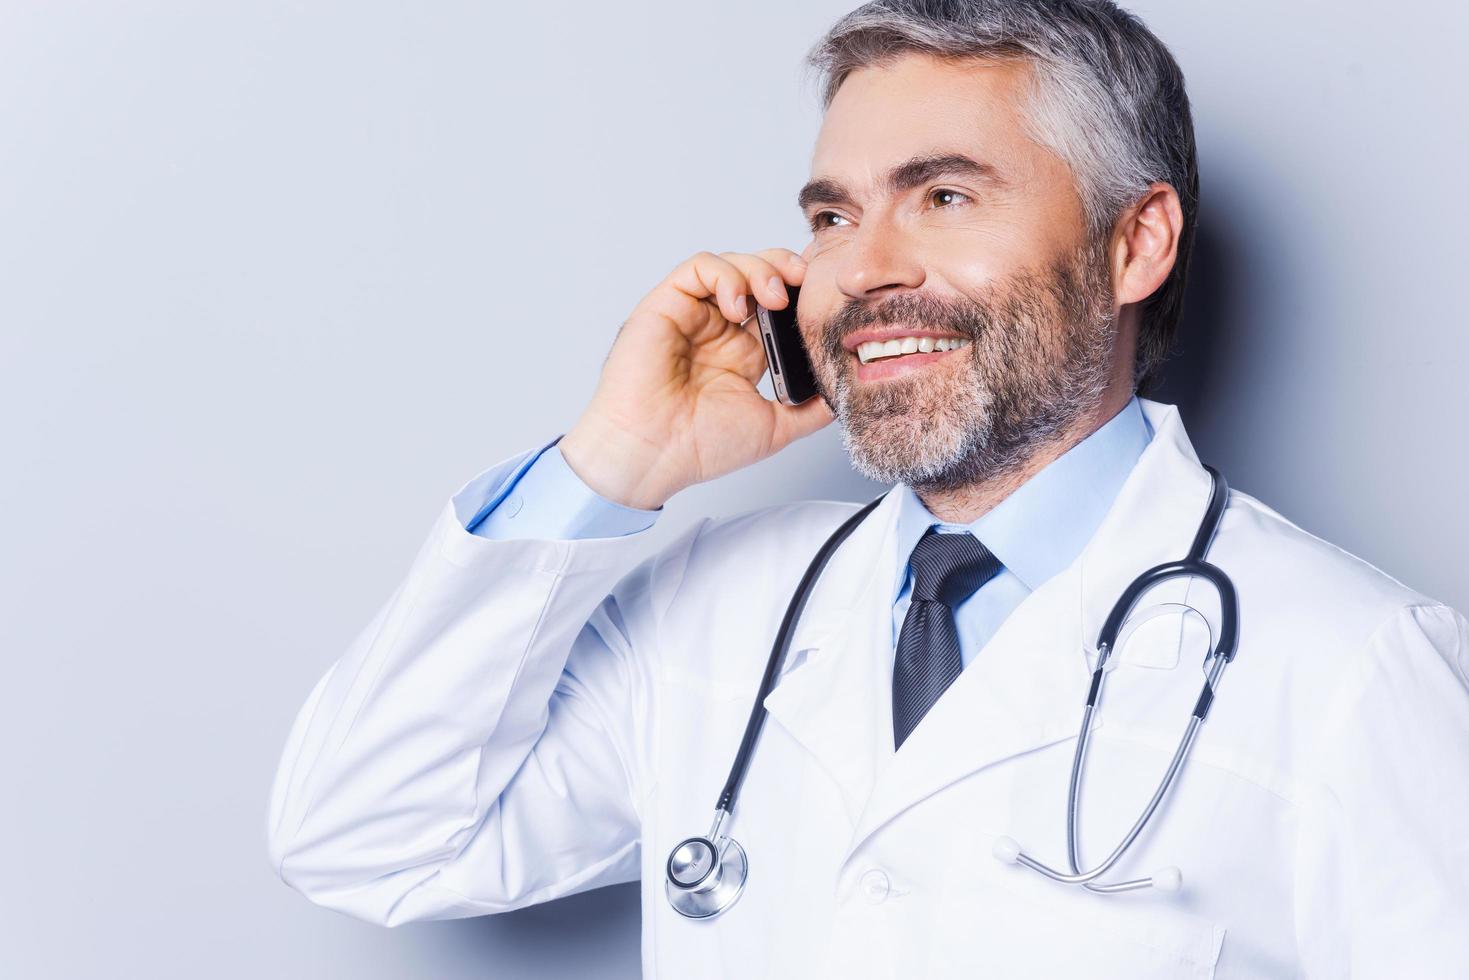 Good news. Confident mature grey hair doctor talking on the mobile phone and smiling while standing against grey background photo